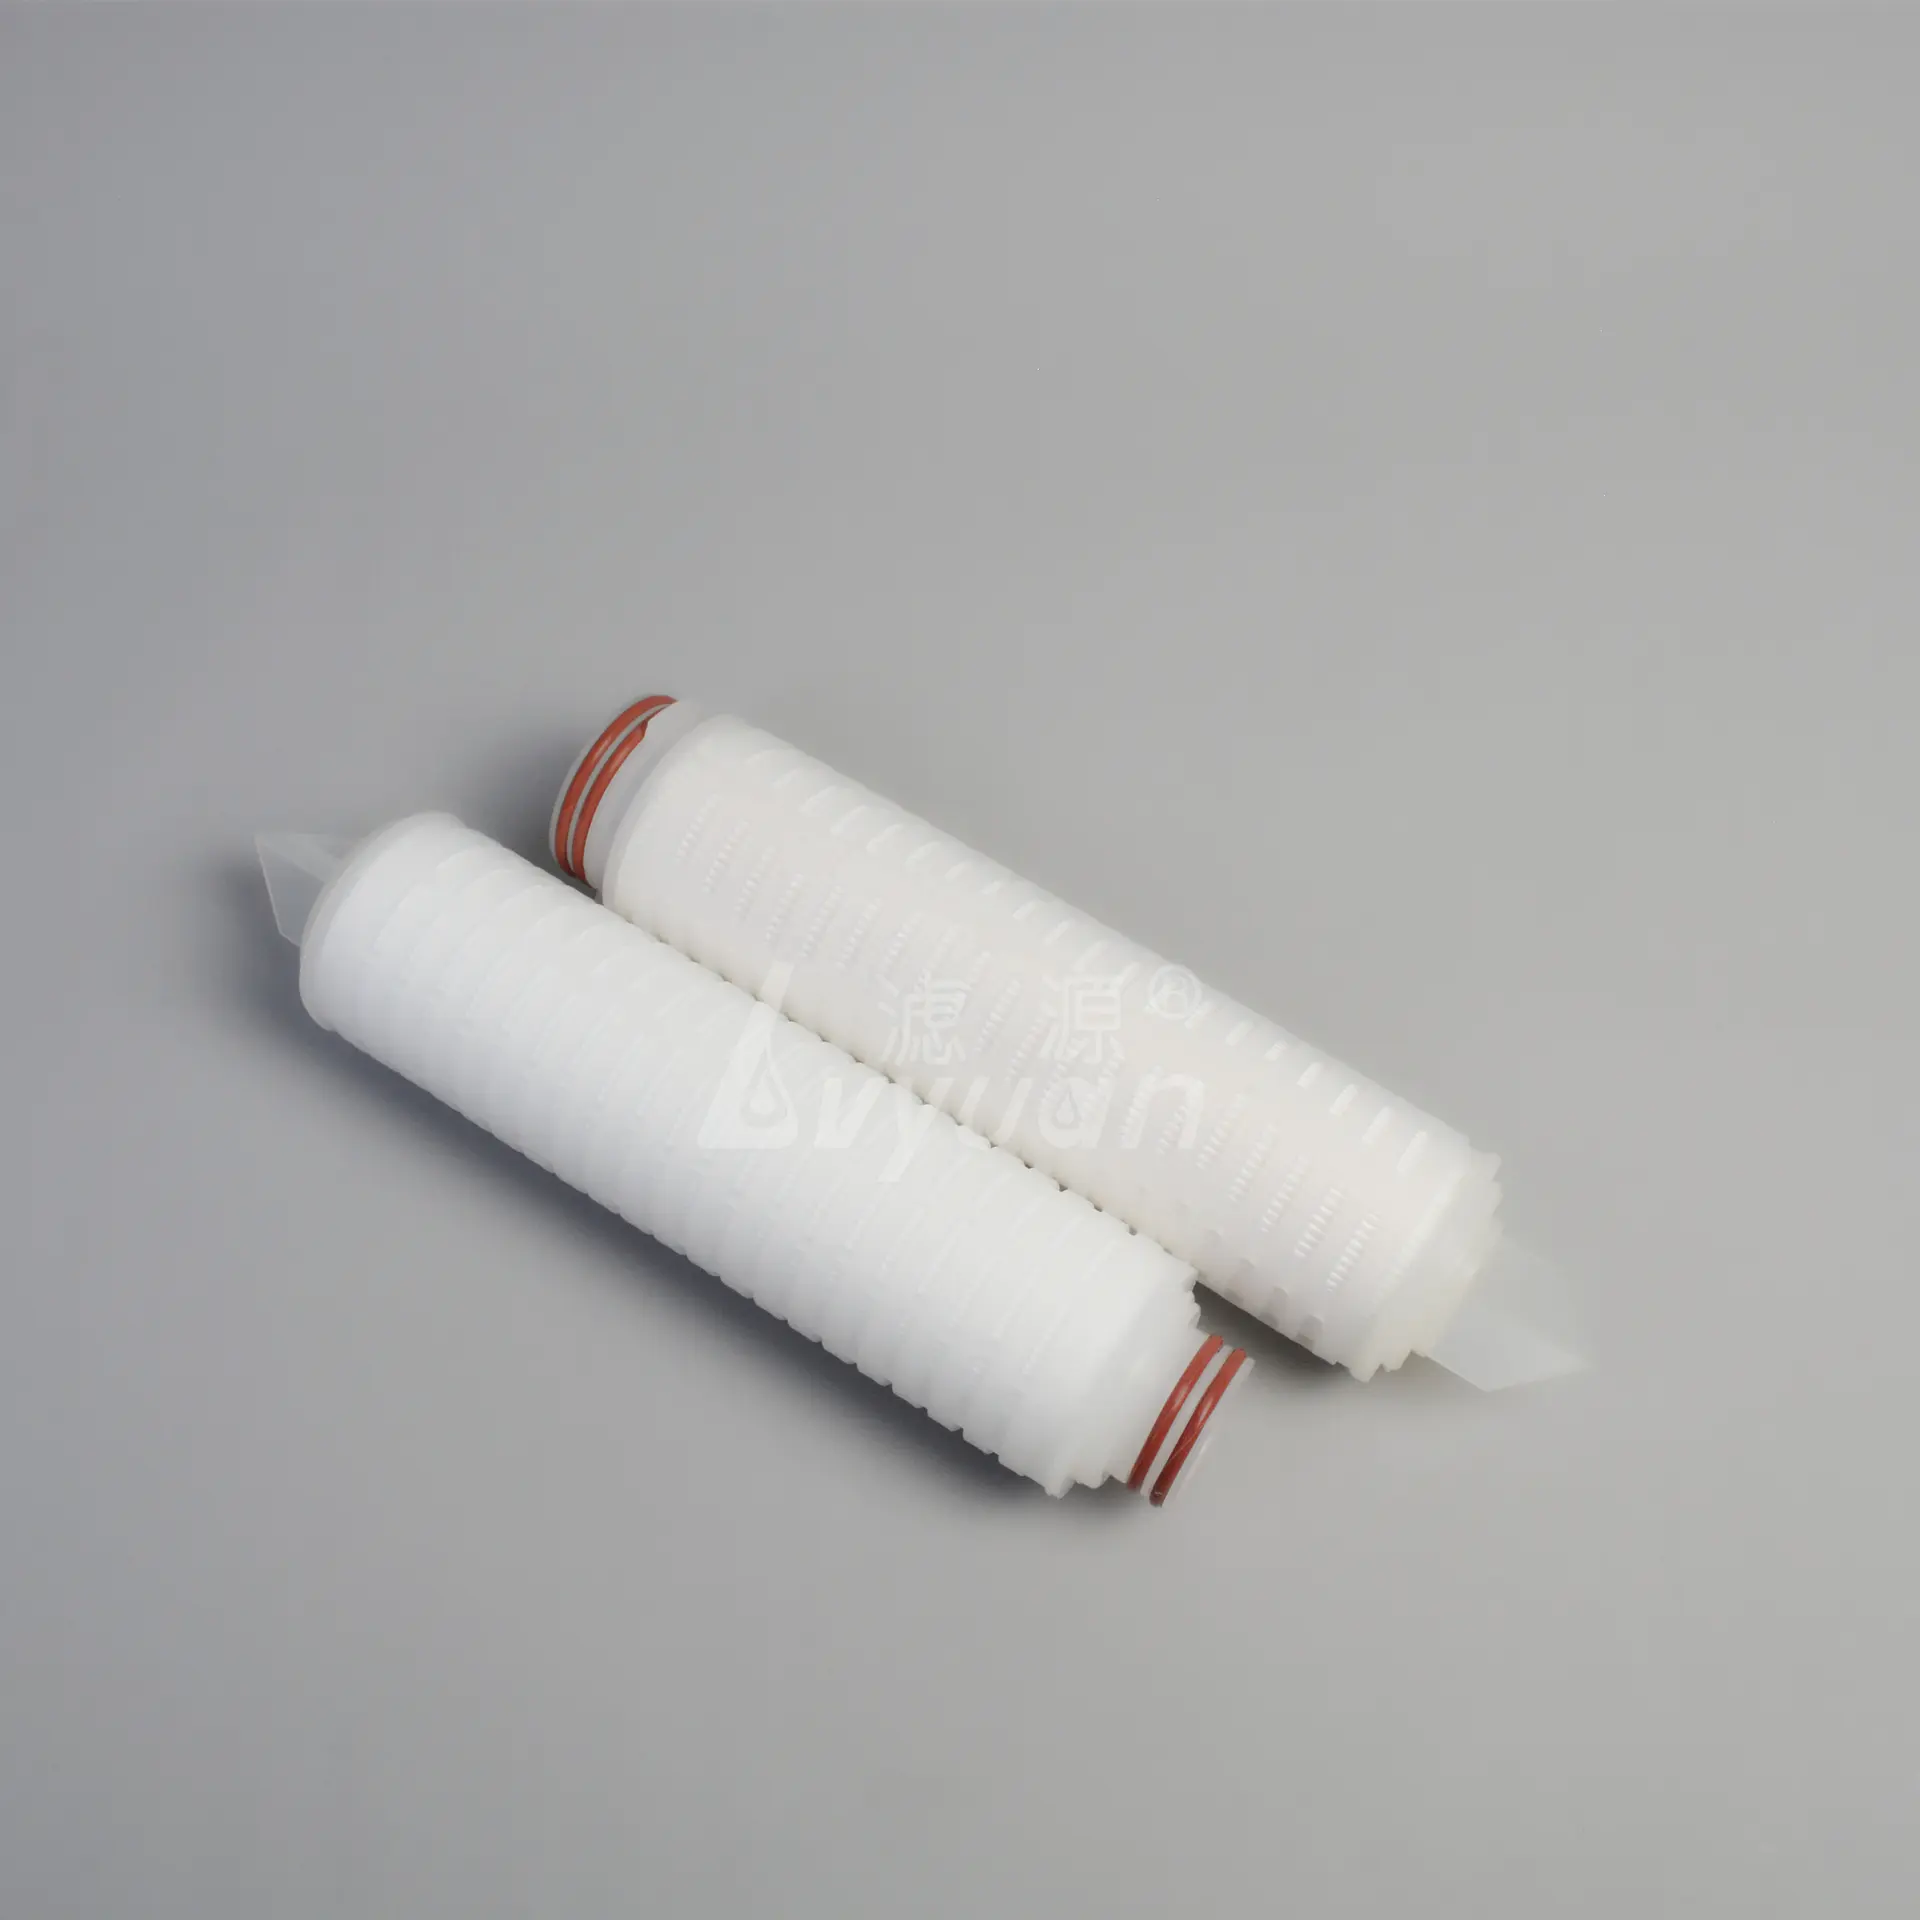 0.2um PP PTFE PVDF PES NYLON 5/10/20 inch pleated membrane water filter with DOE SOE end-cap